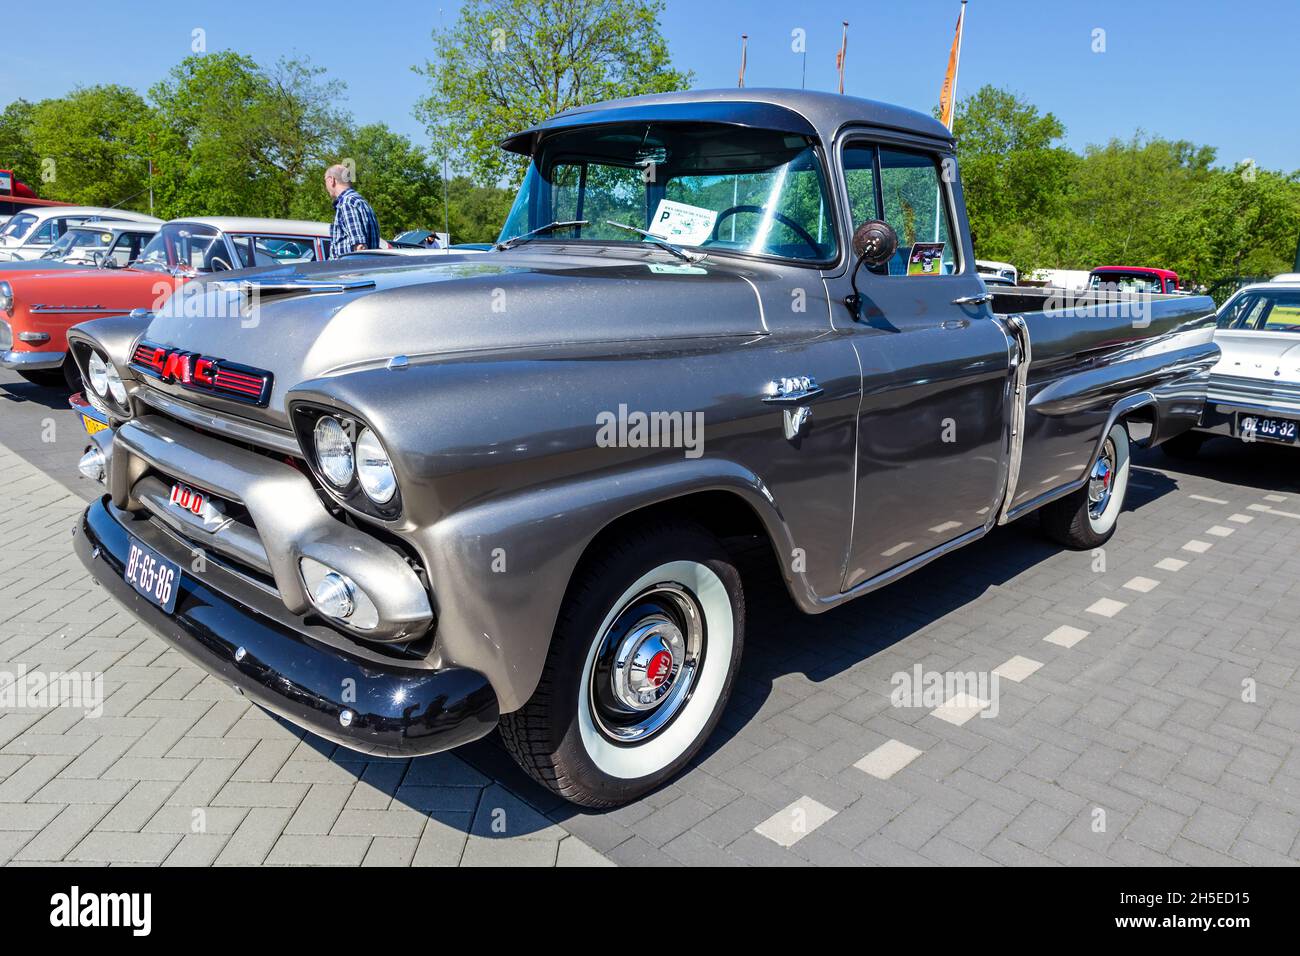 1959 GMC 100 classic pickup truck on the parking lot. Rosmalen, The Netherlands - May 8, 2016 Stock Photo